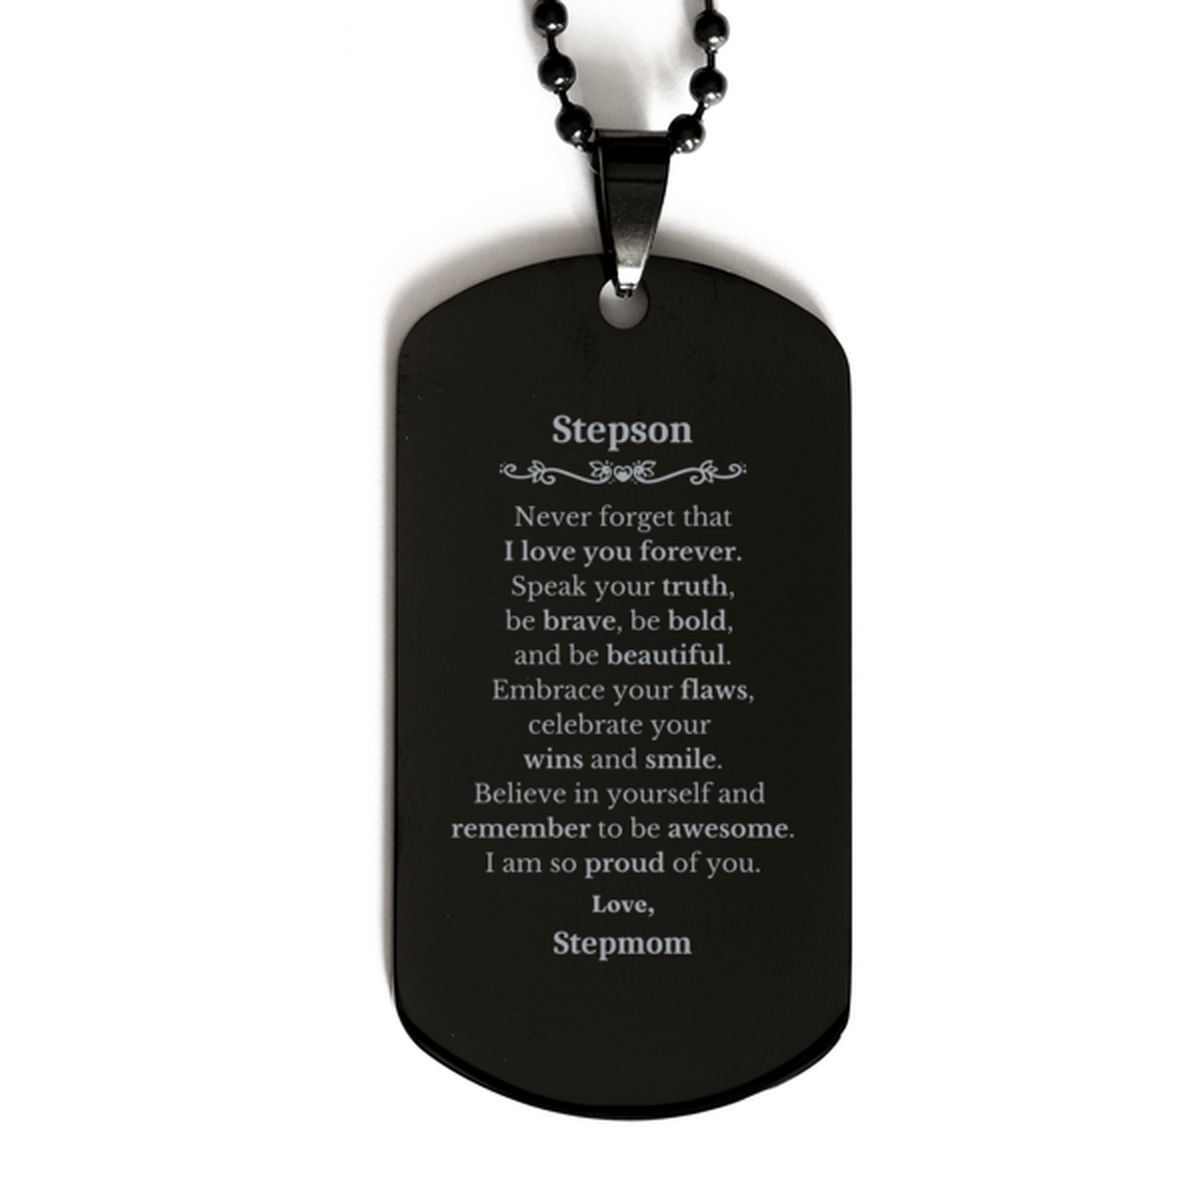 Stepson Black Dog Tag, Never forget that I love you forever, Inspirational Stepson Birthday Unique Gifts From Stepmom